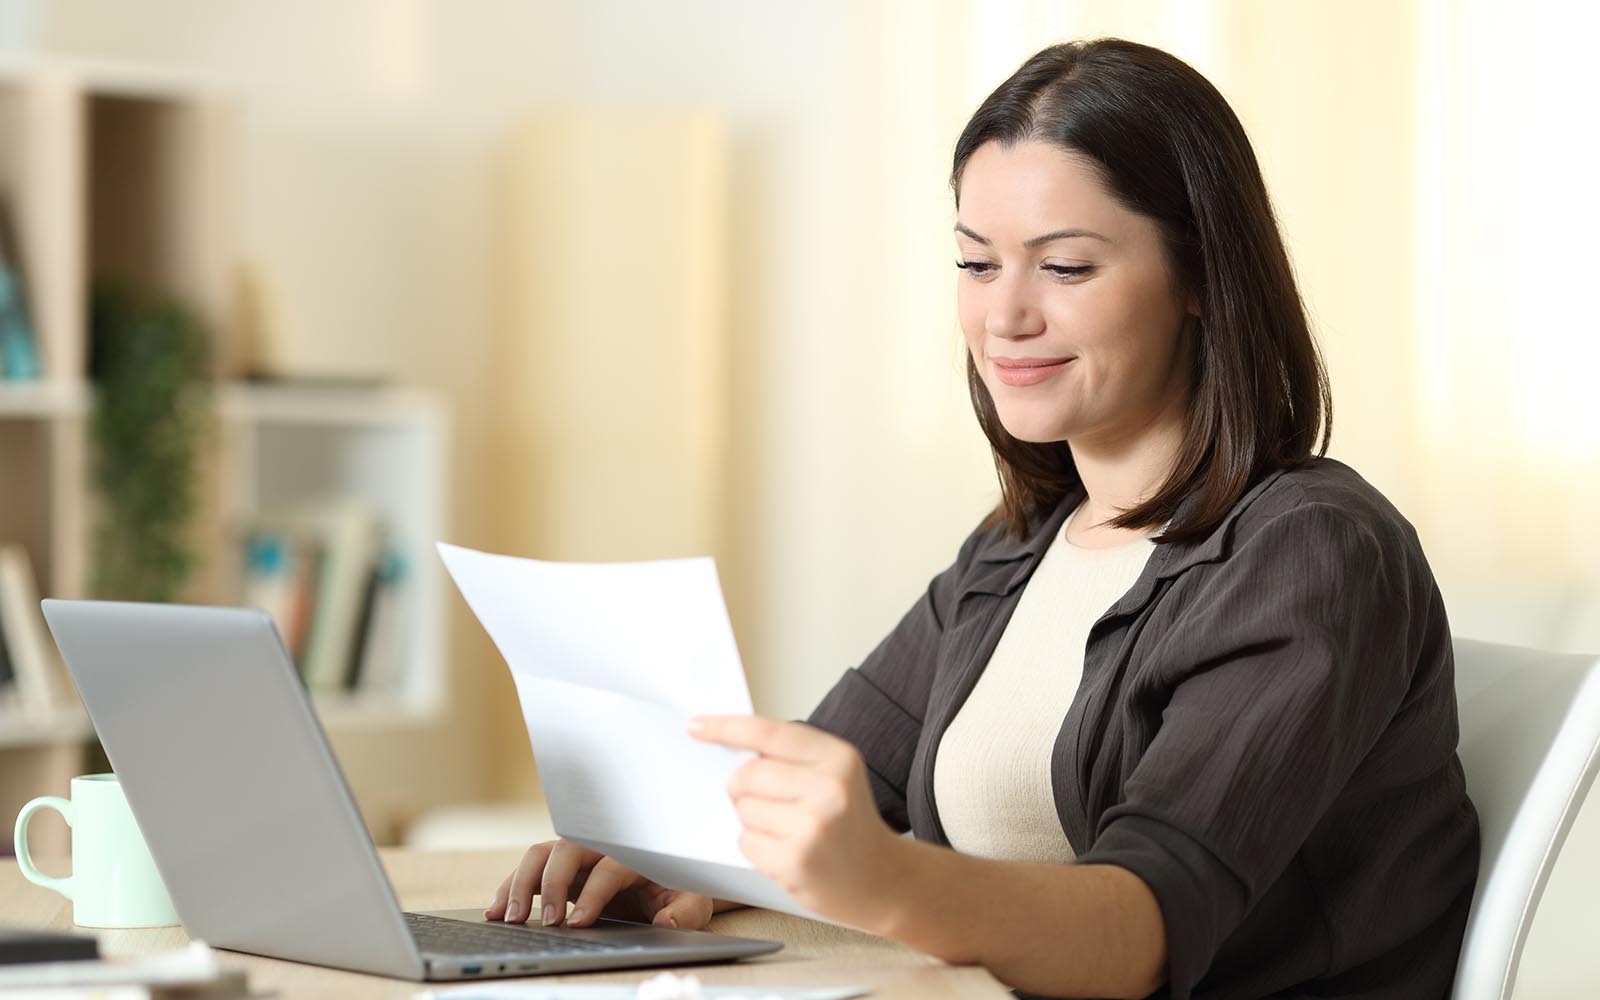 Woman reading a letter using laptop at home